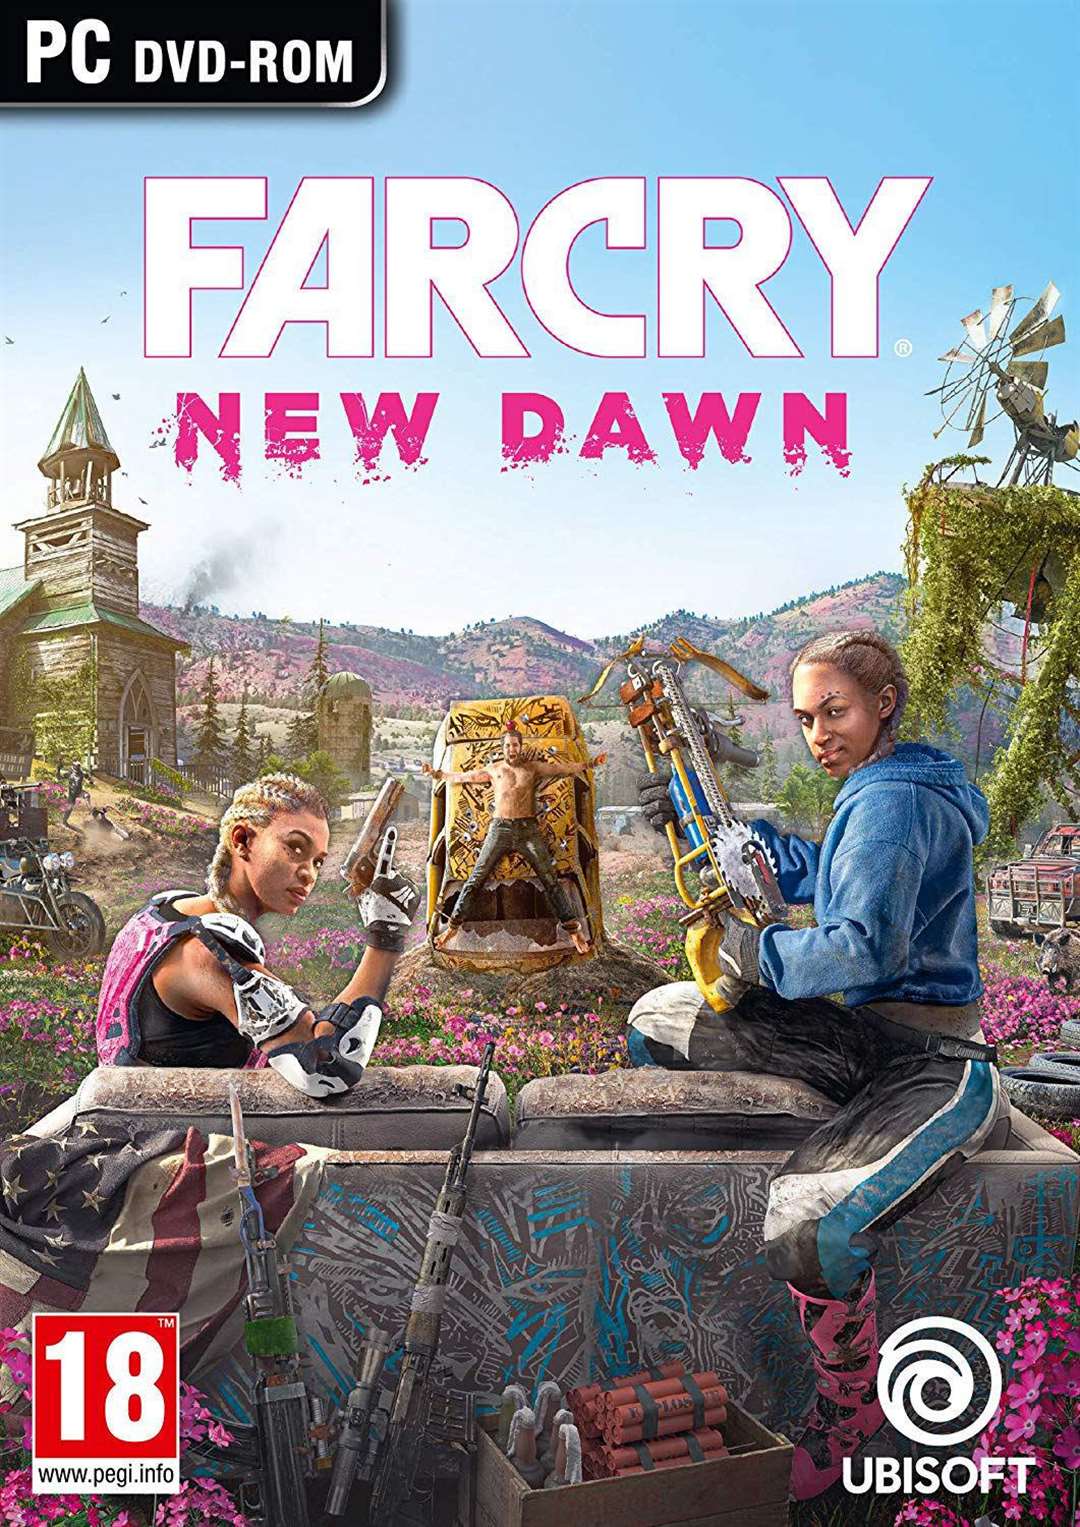 Far Cry New Dawn. Picture: Handout/PA